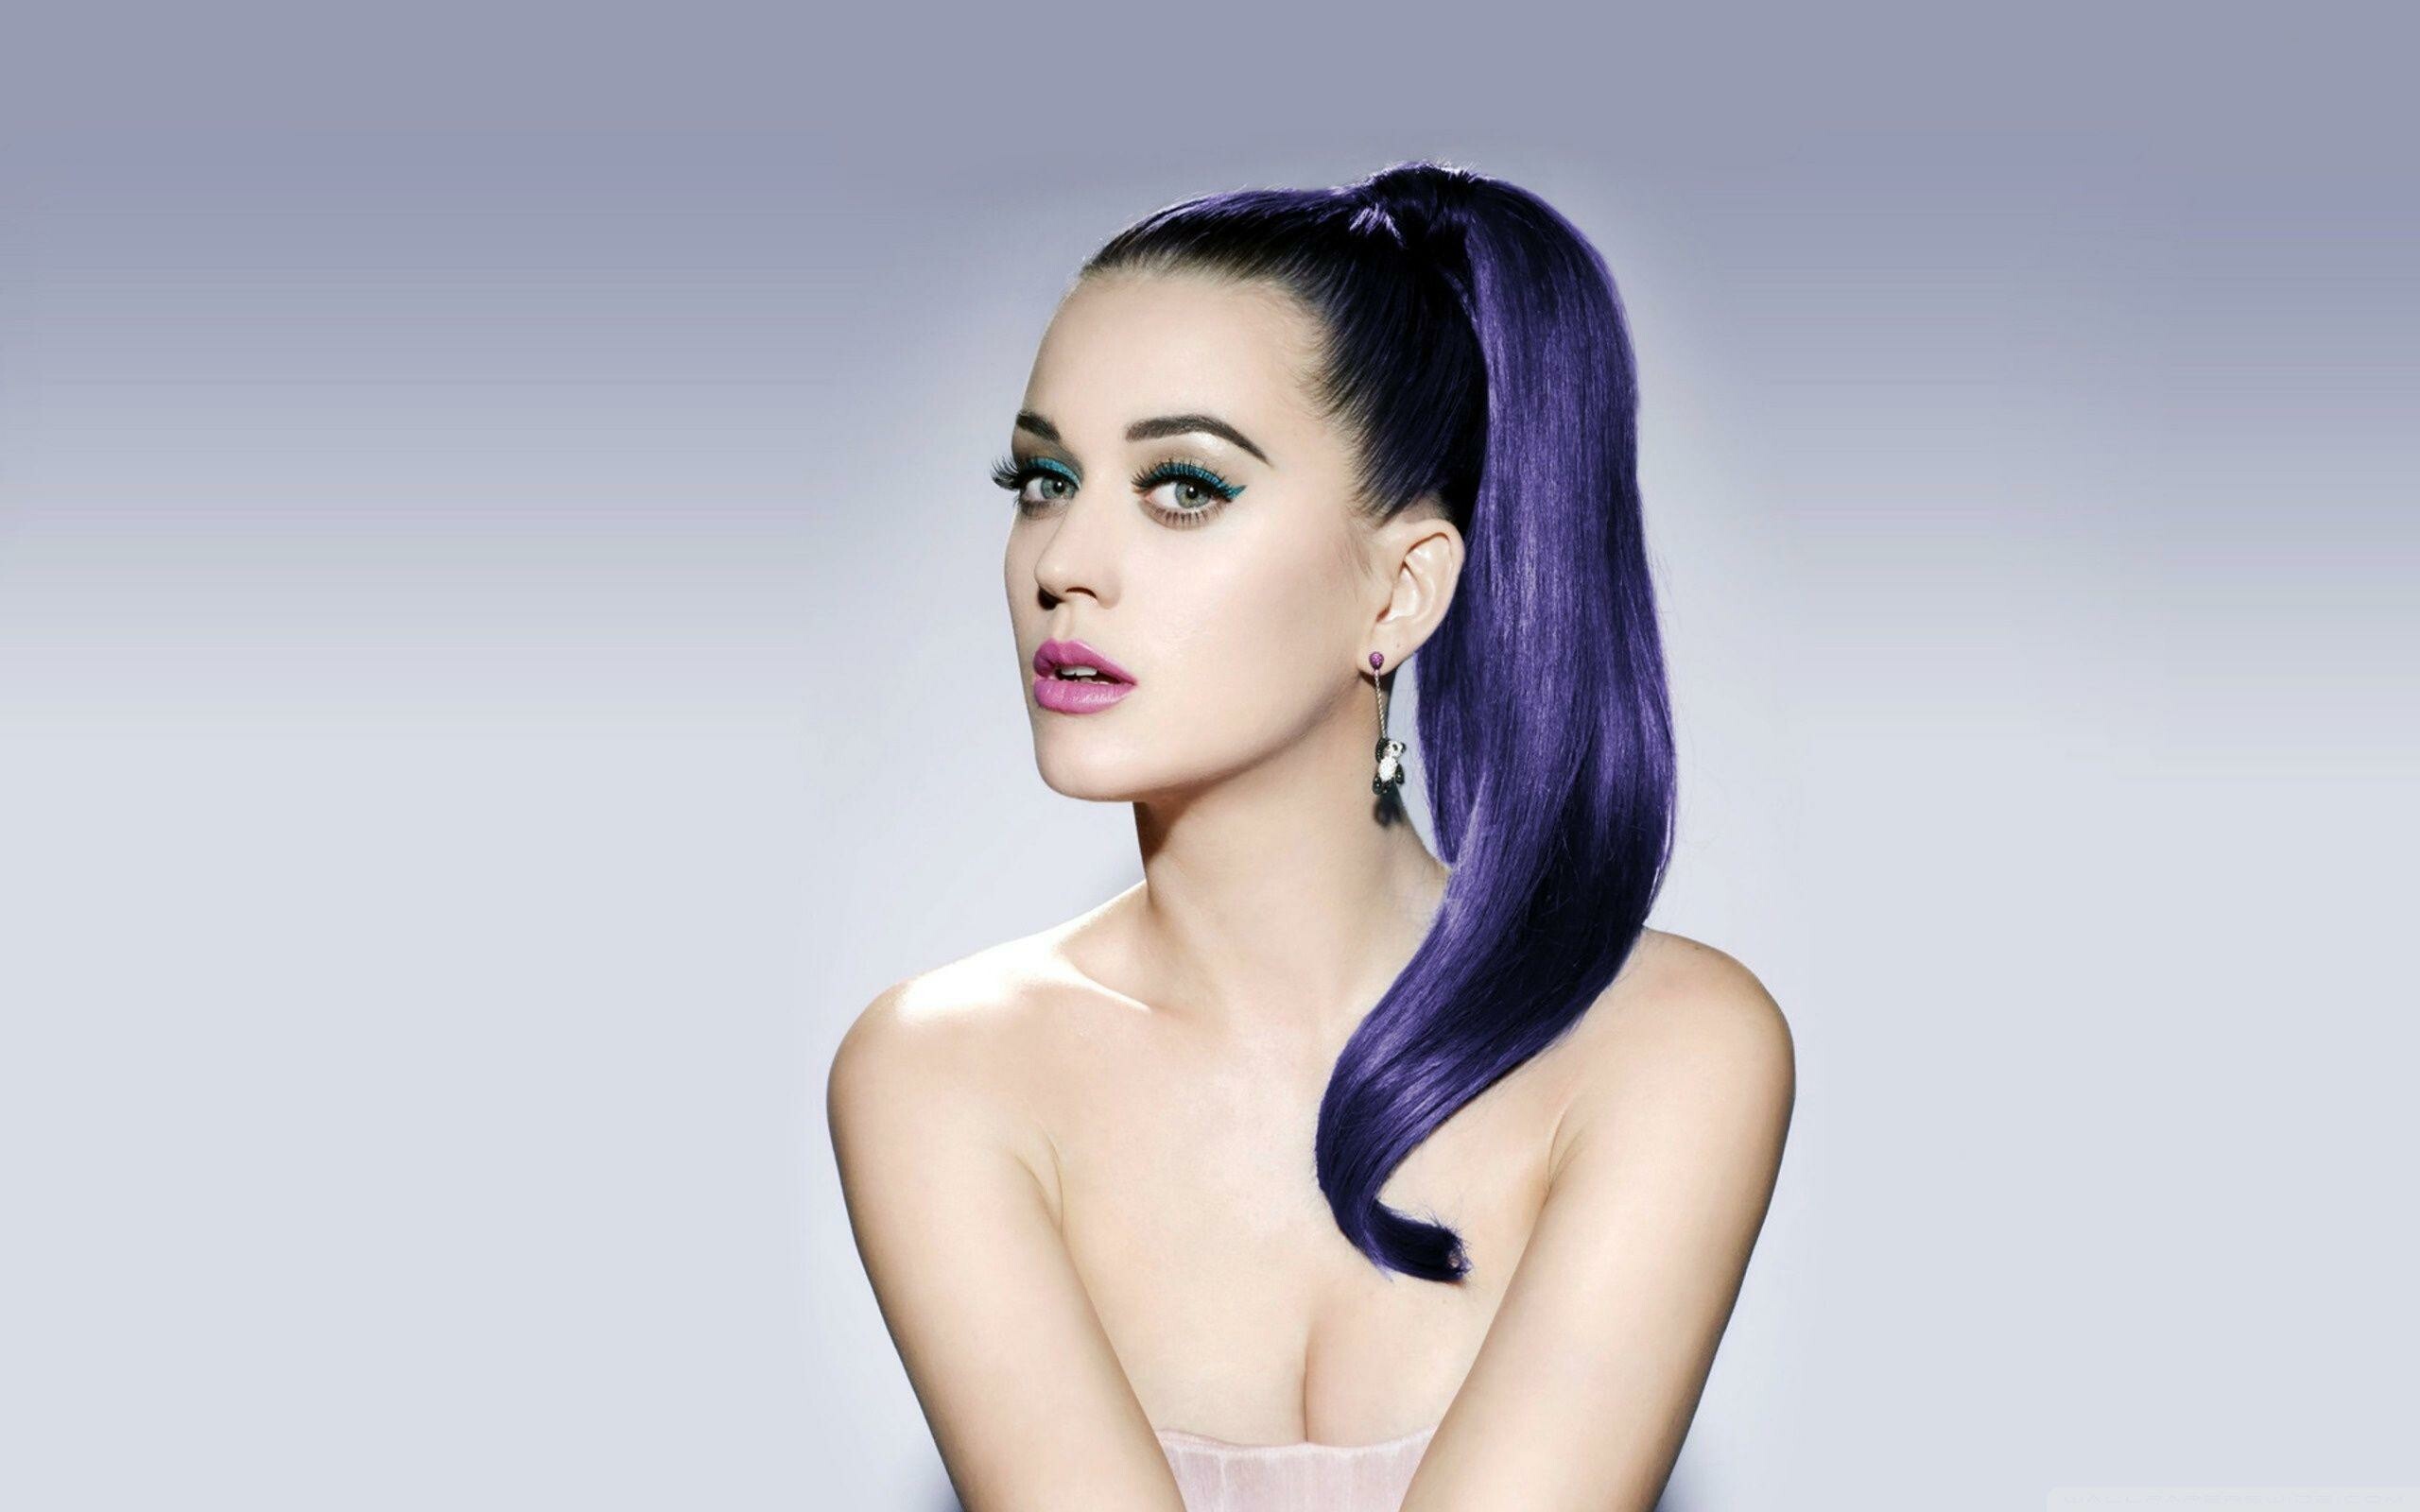 Katy Perry: A remix of "Peacock" was released on March 26, 2012 on iTunes. 2560x1600 HD Background.